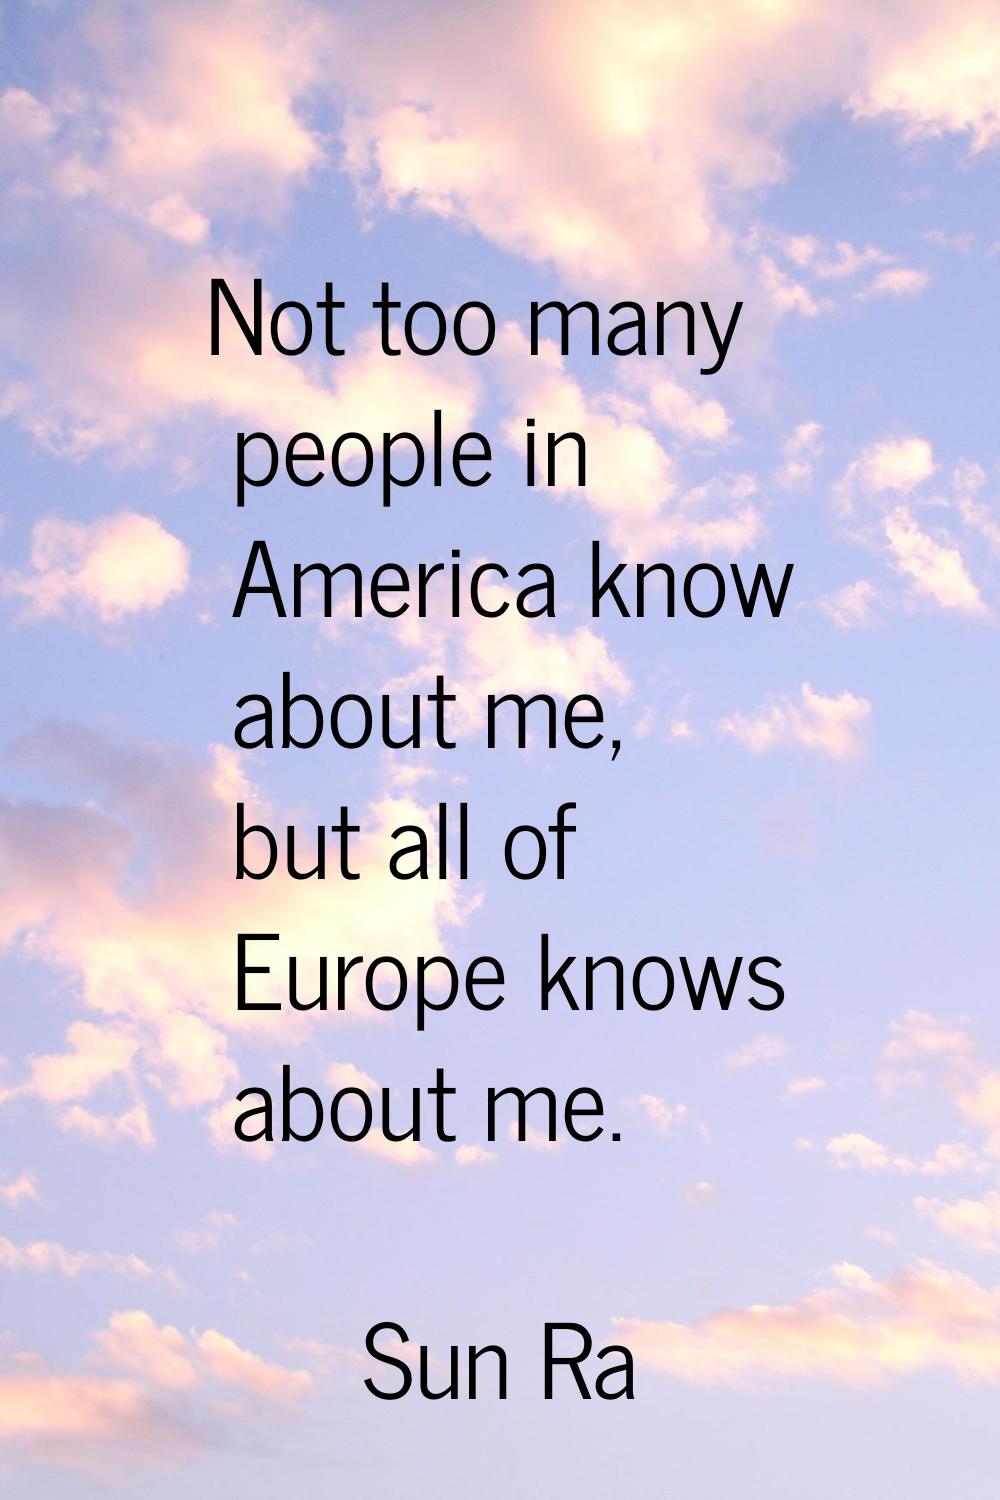 Not too many people in America know about me, but all of Europe knows about me.